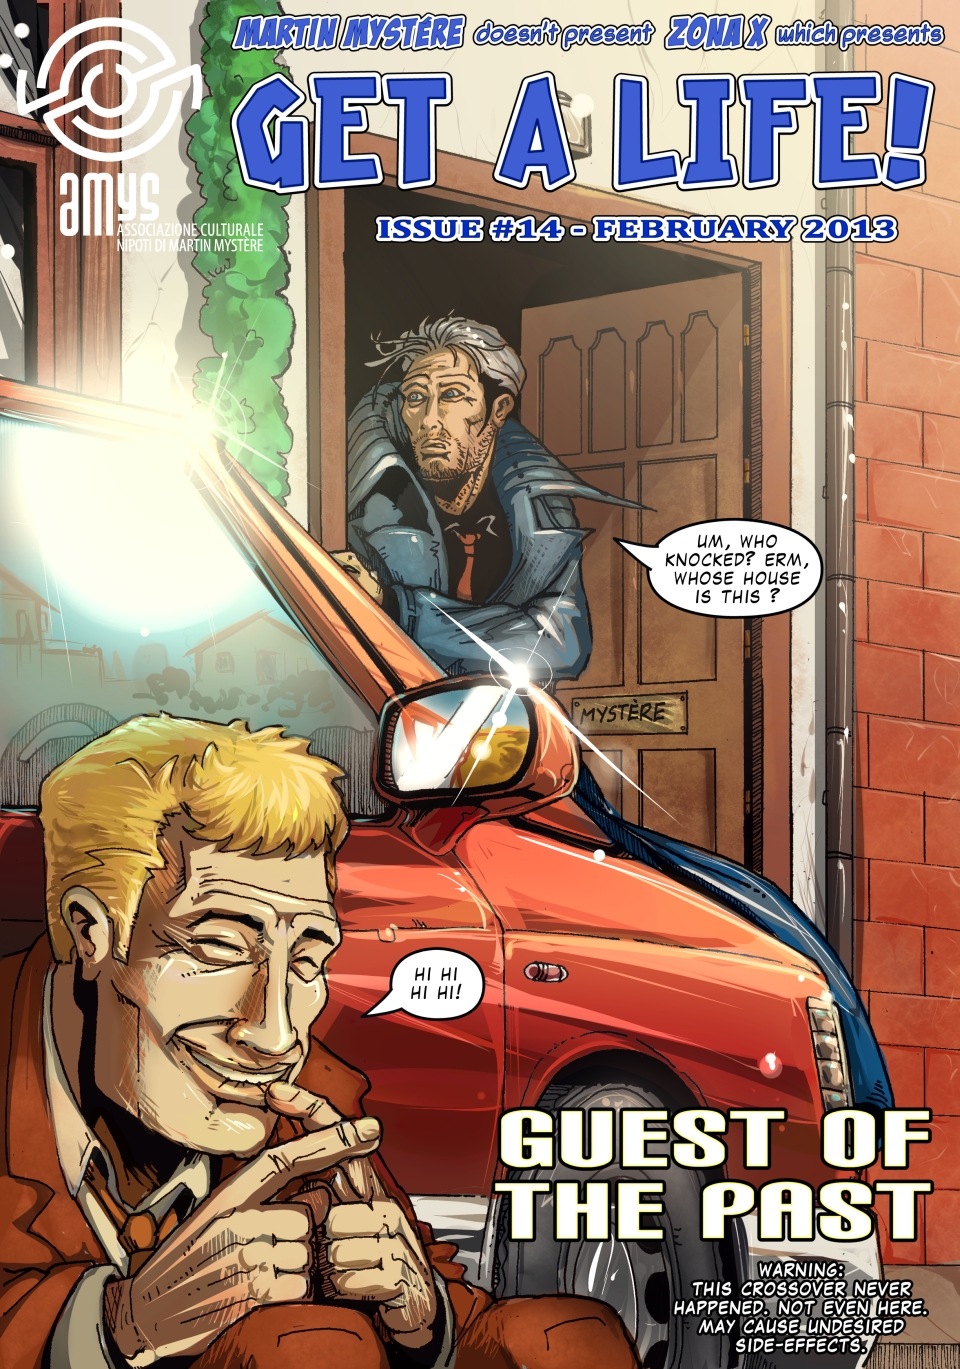 Get a Life 14 - cover - Guest of the Past